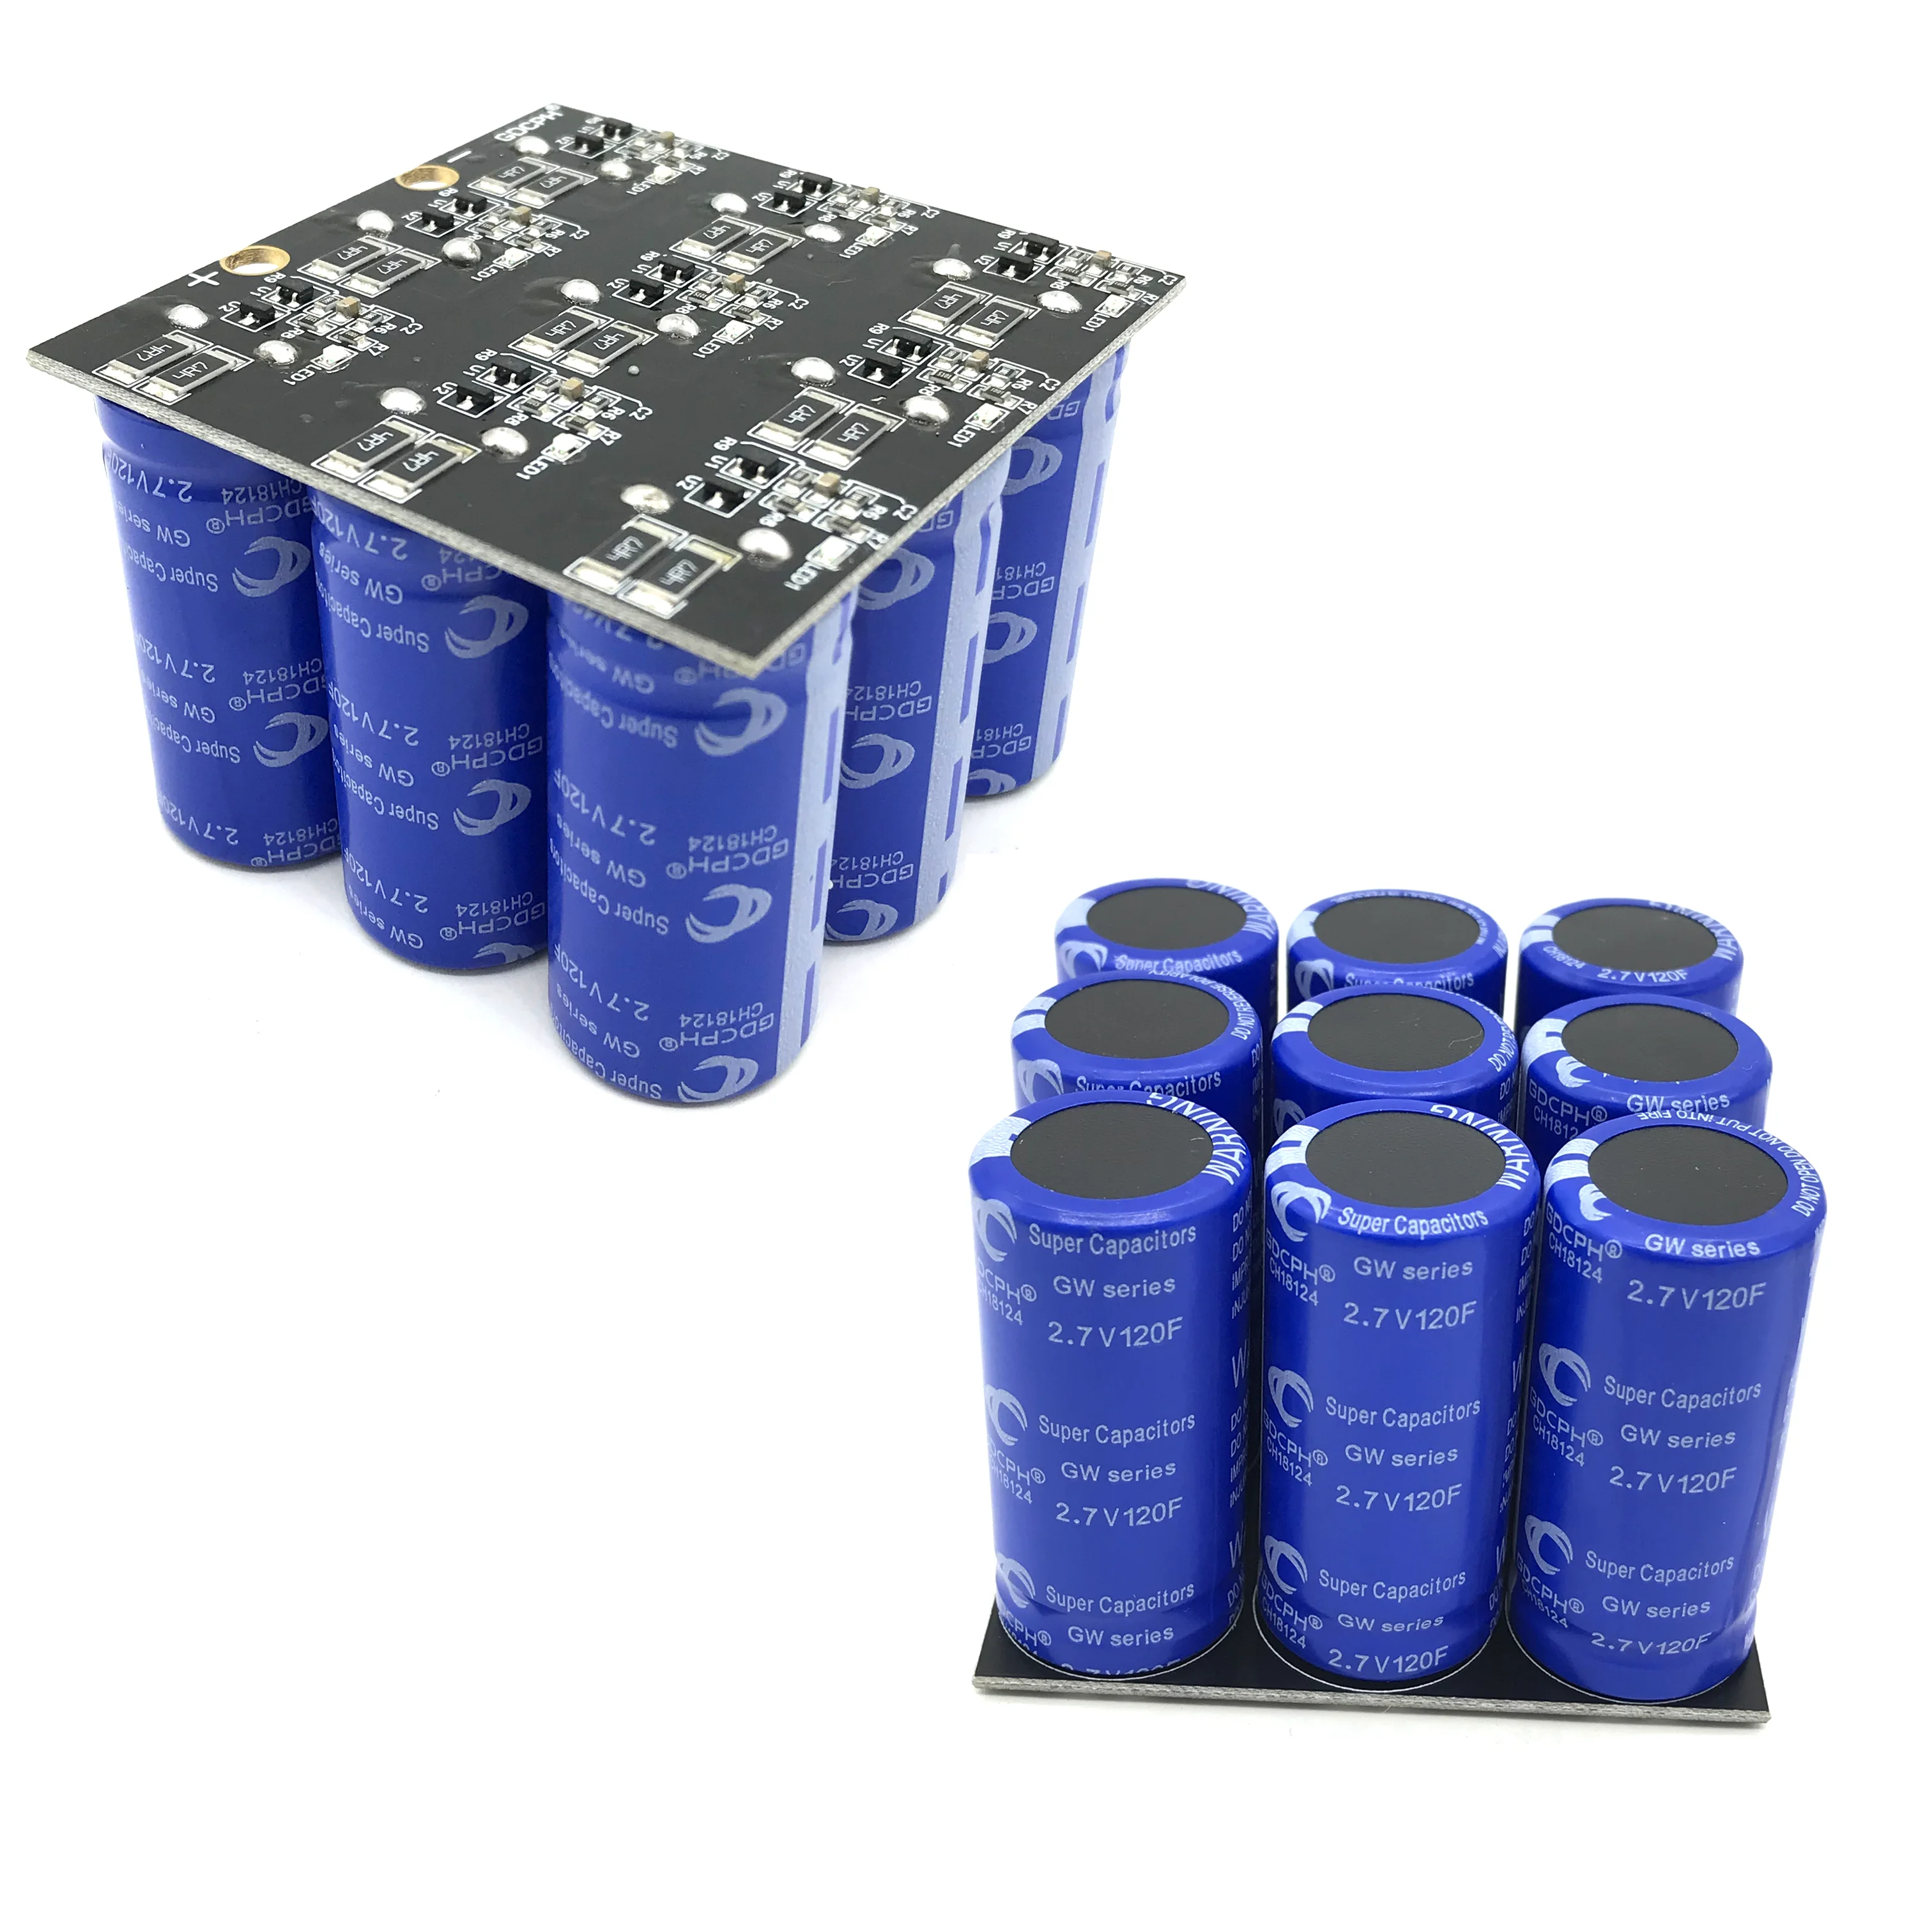 Super Capacitors Farad Capacitor Modules 24V 13F SuperCapacitors With Protection Board Horn Type UltraCapacitor 9PCS 2.7V 120F